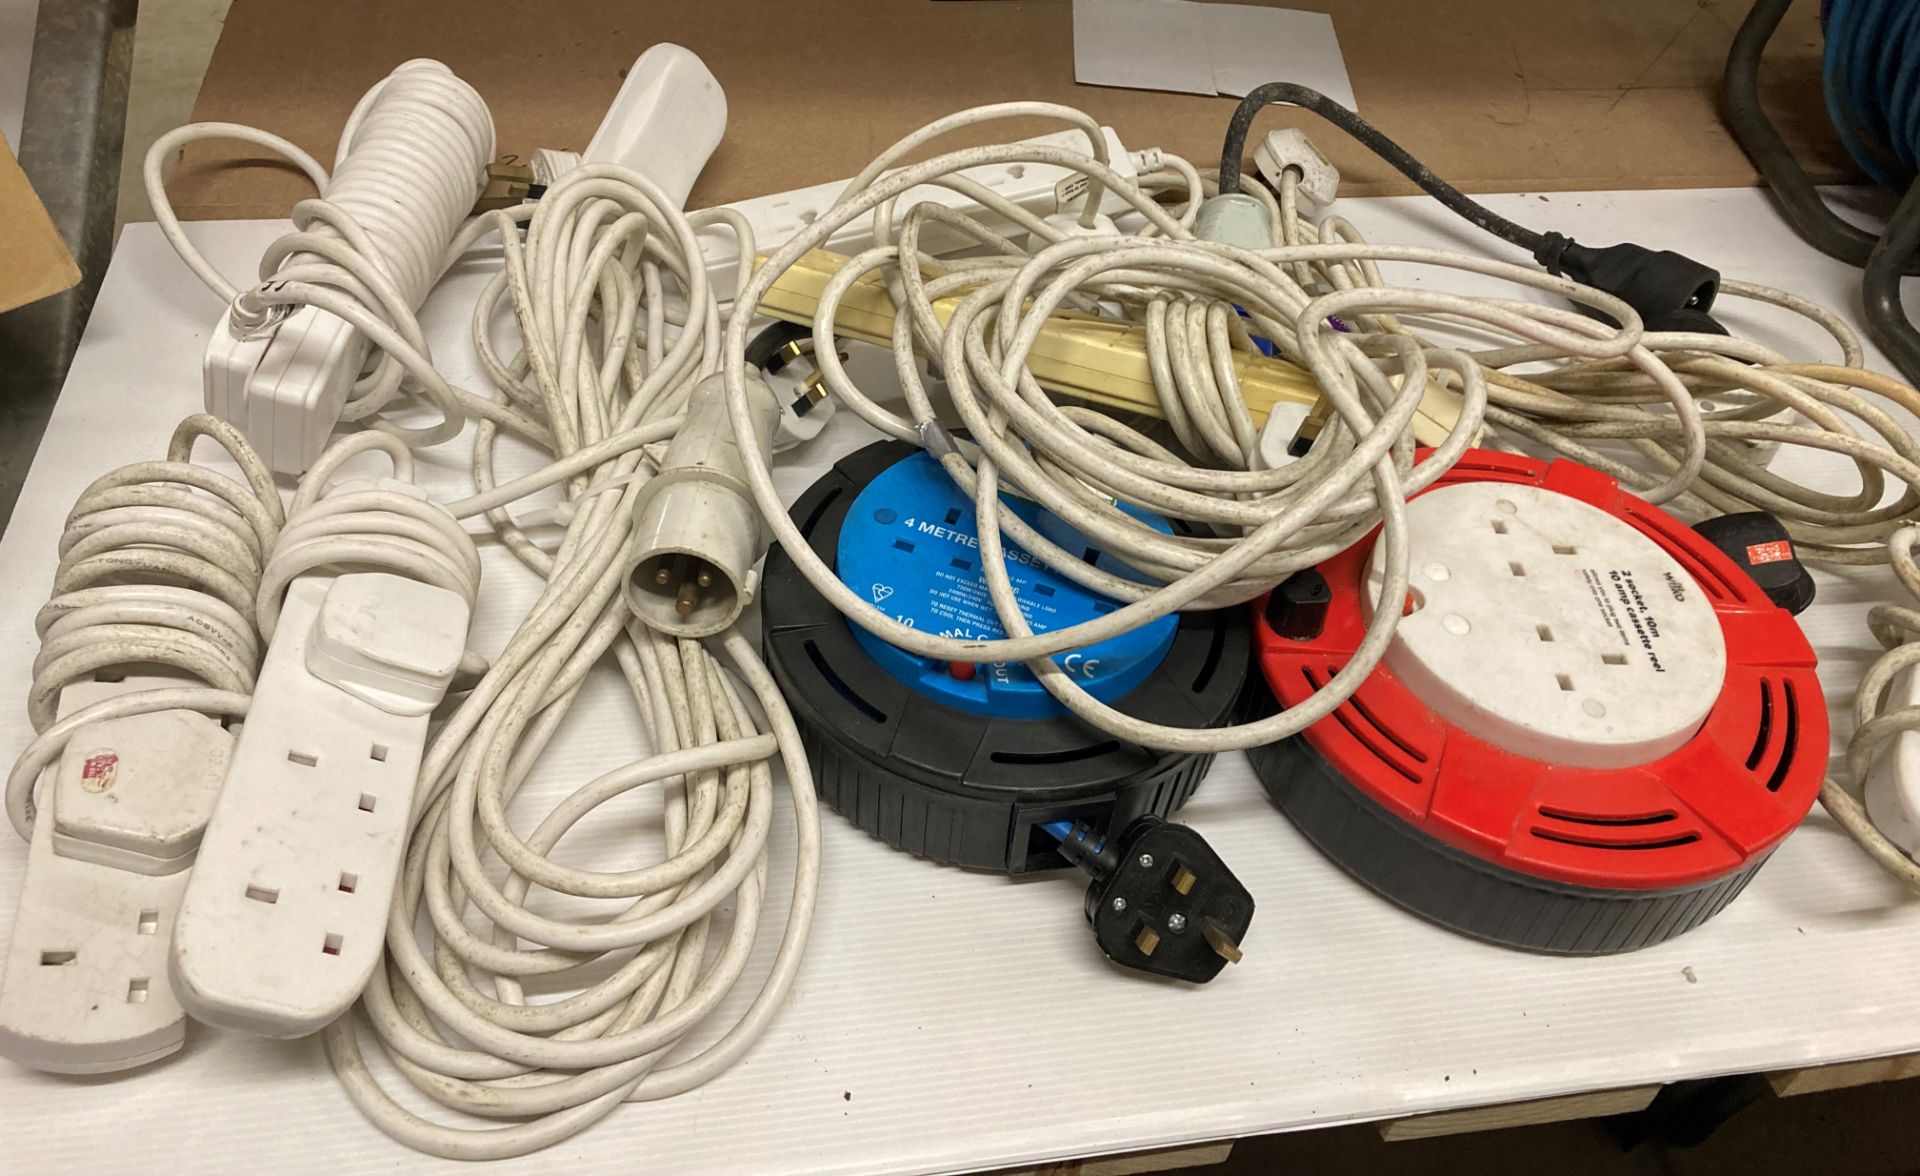 10 x assorted 2 and 4 gang extension reels and cables (saleroom location: D06)